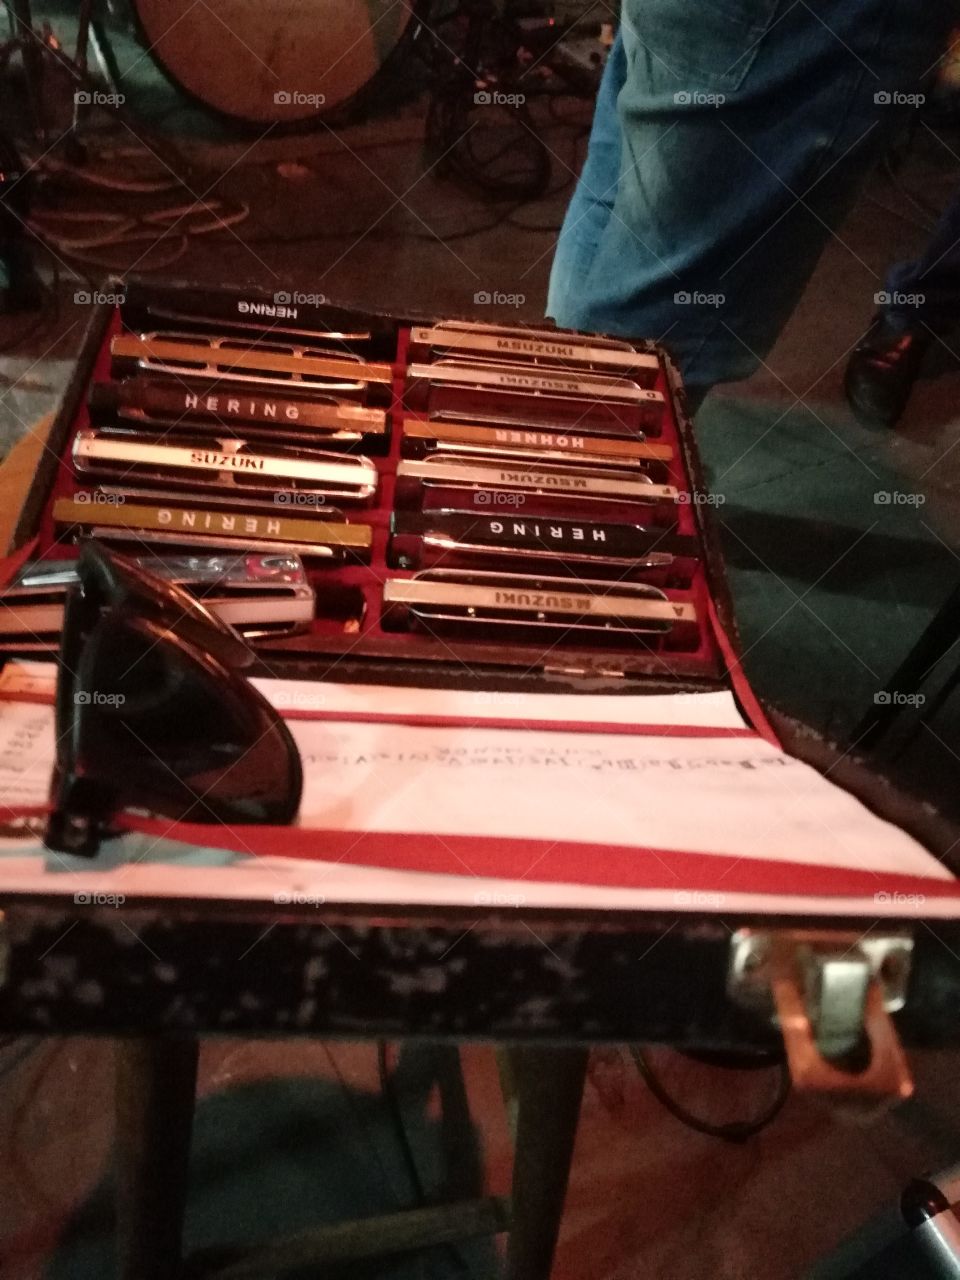 Music's instruments